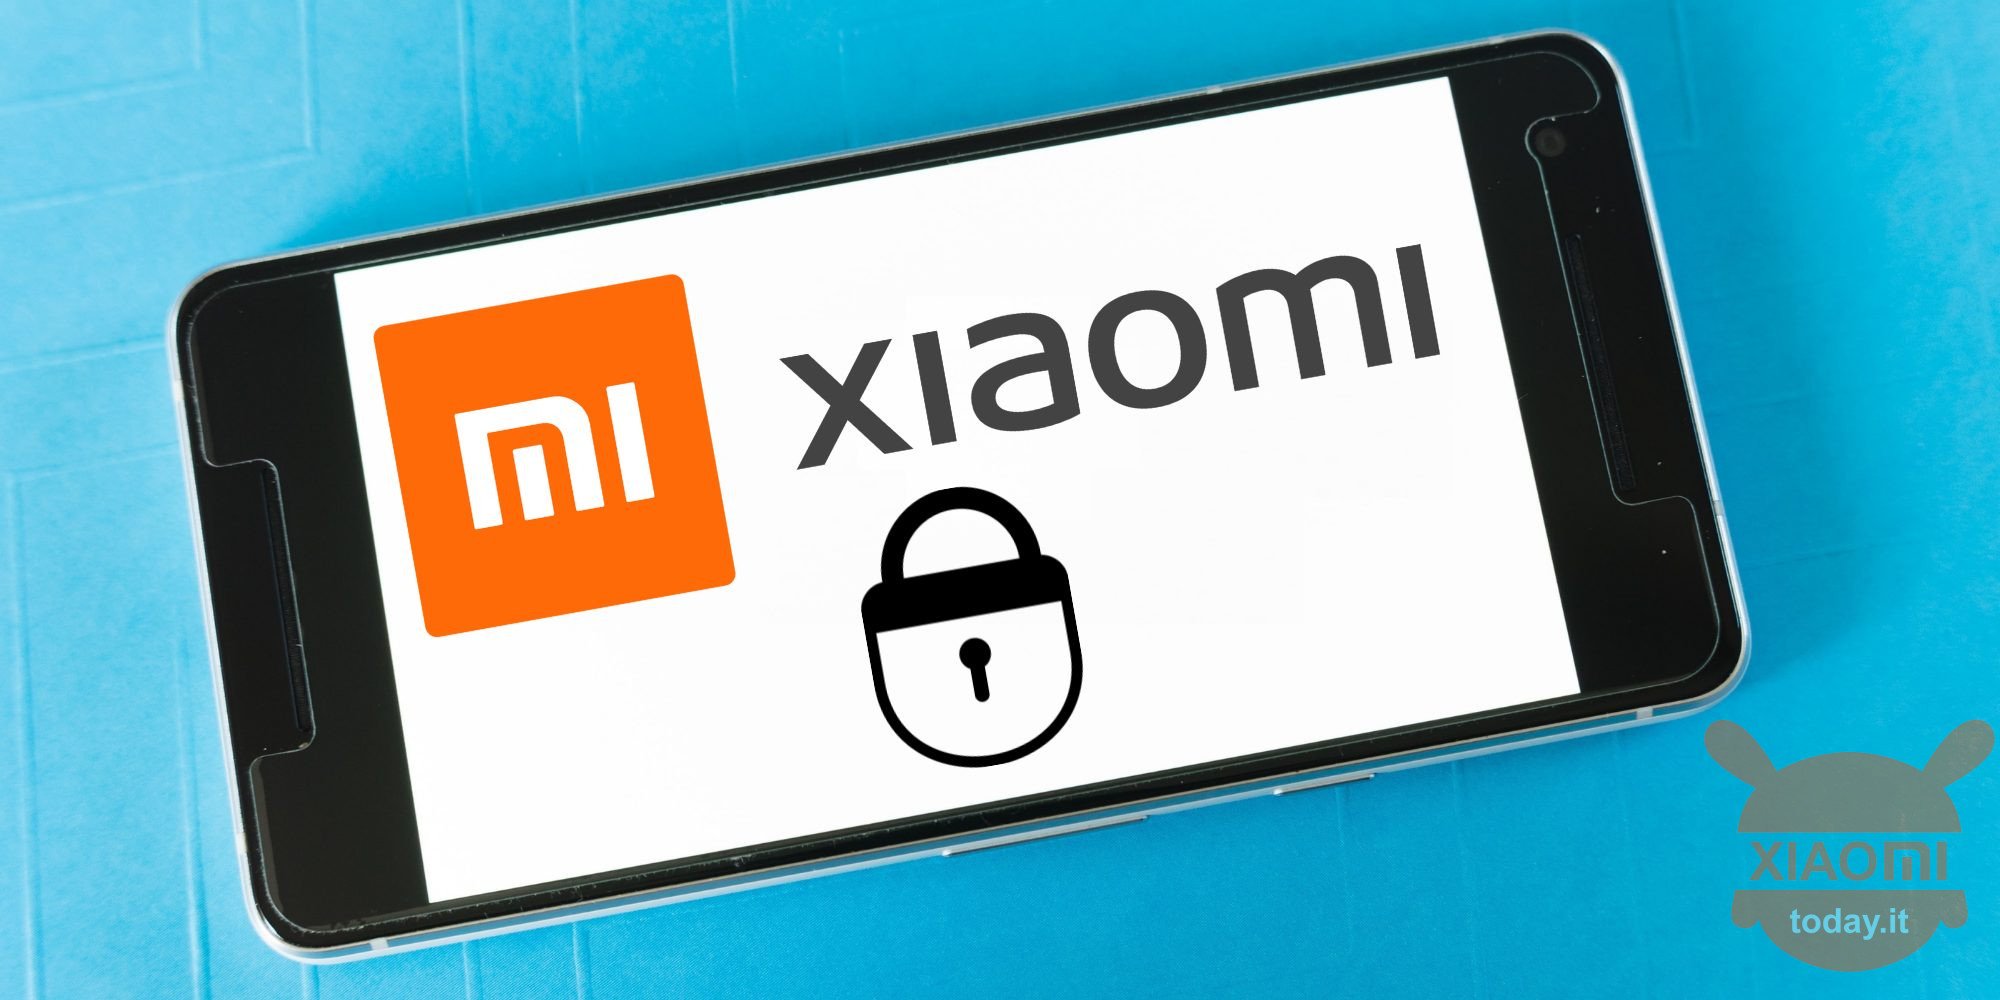 xiaomi blocked smartphones in cuba and syria: here's why